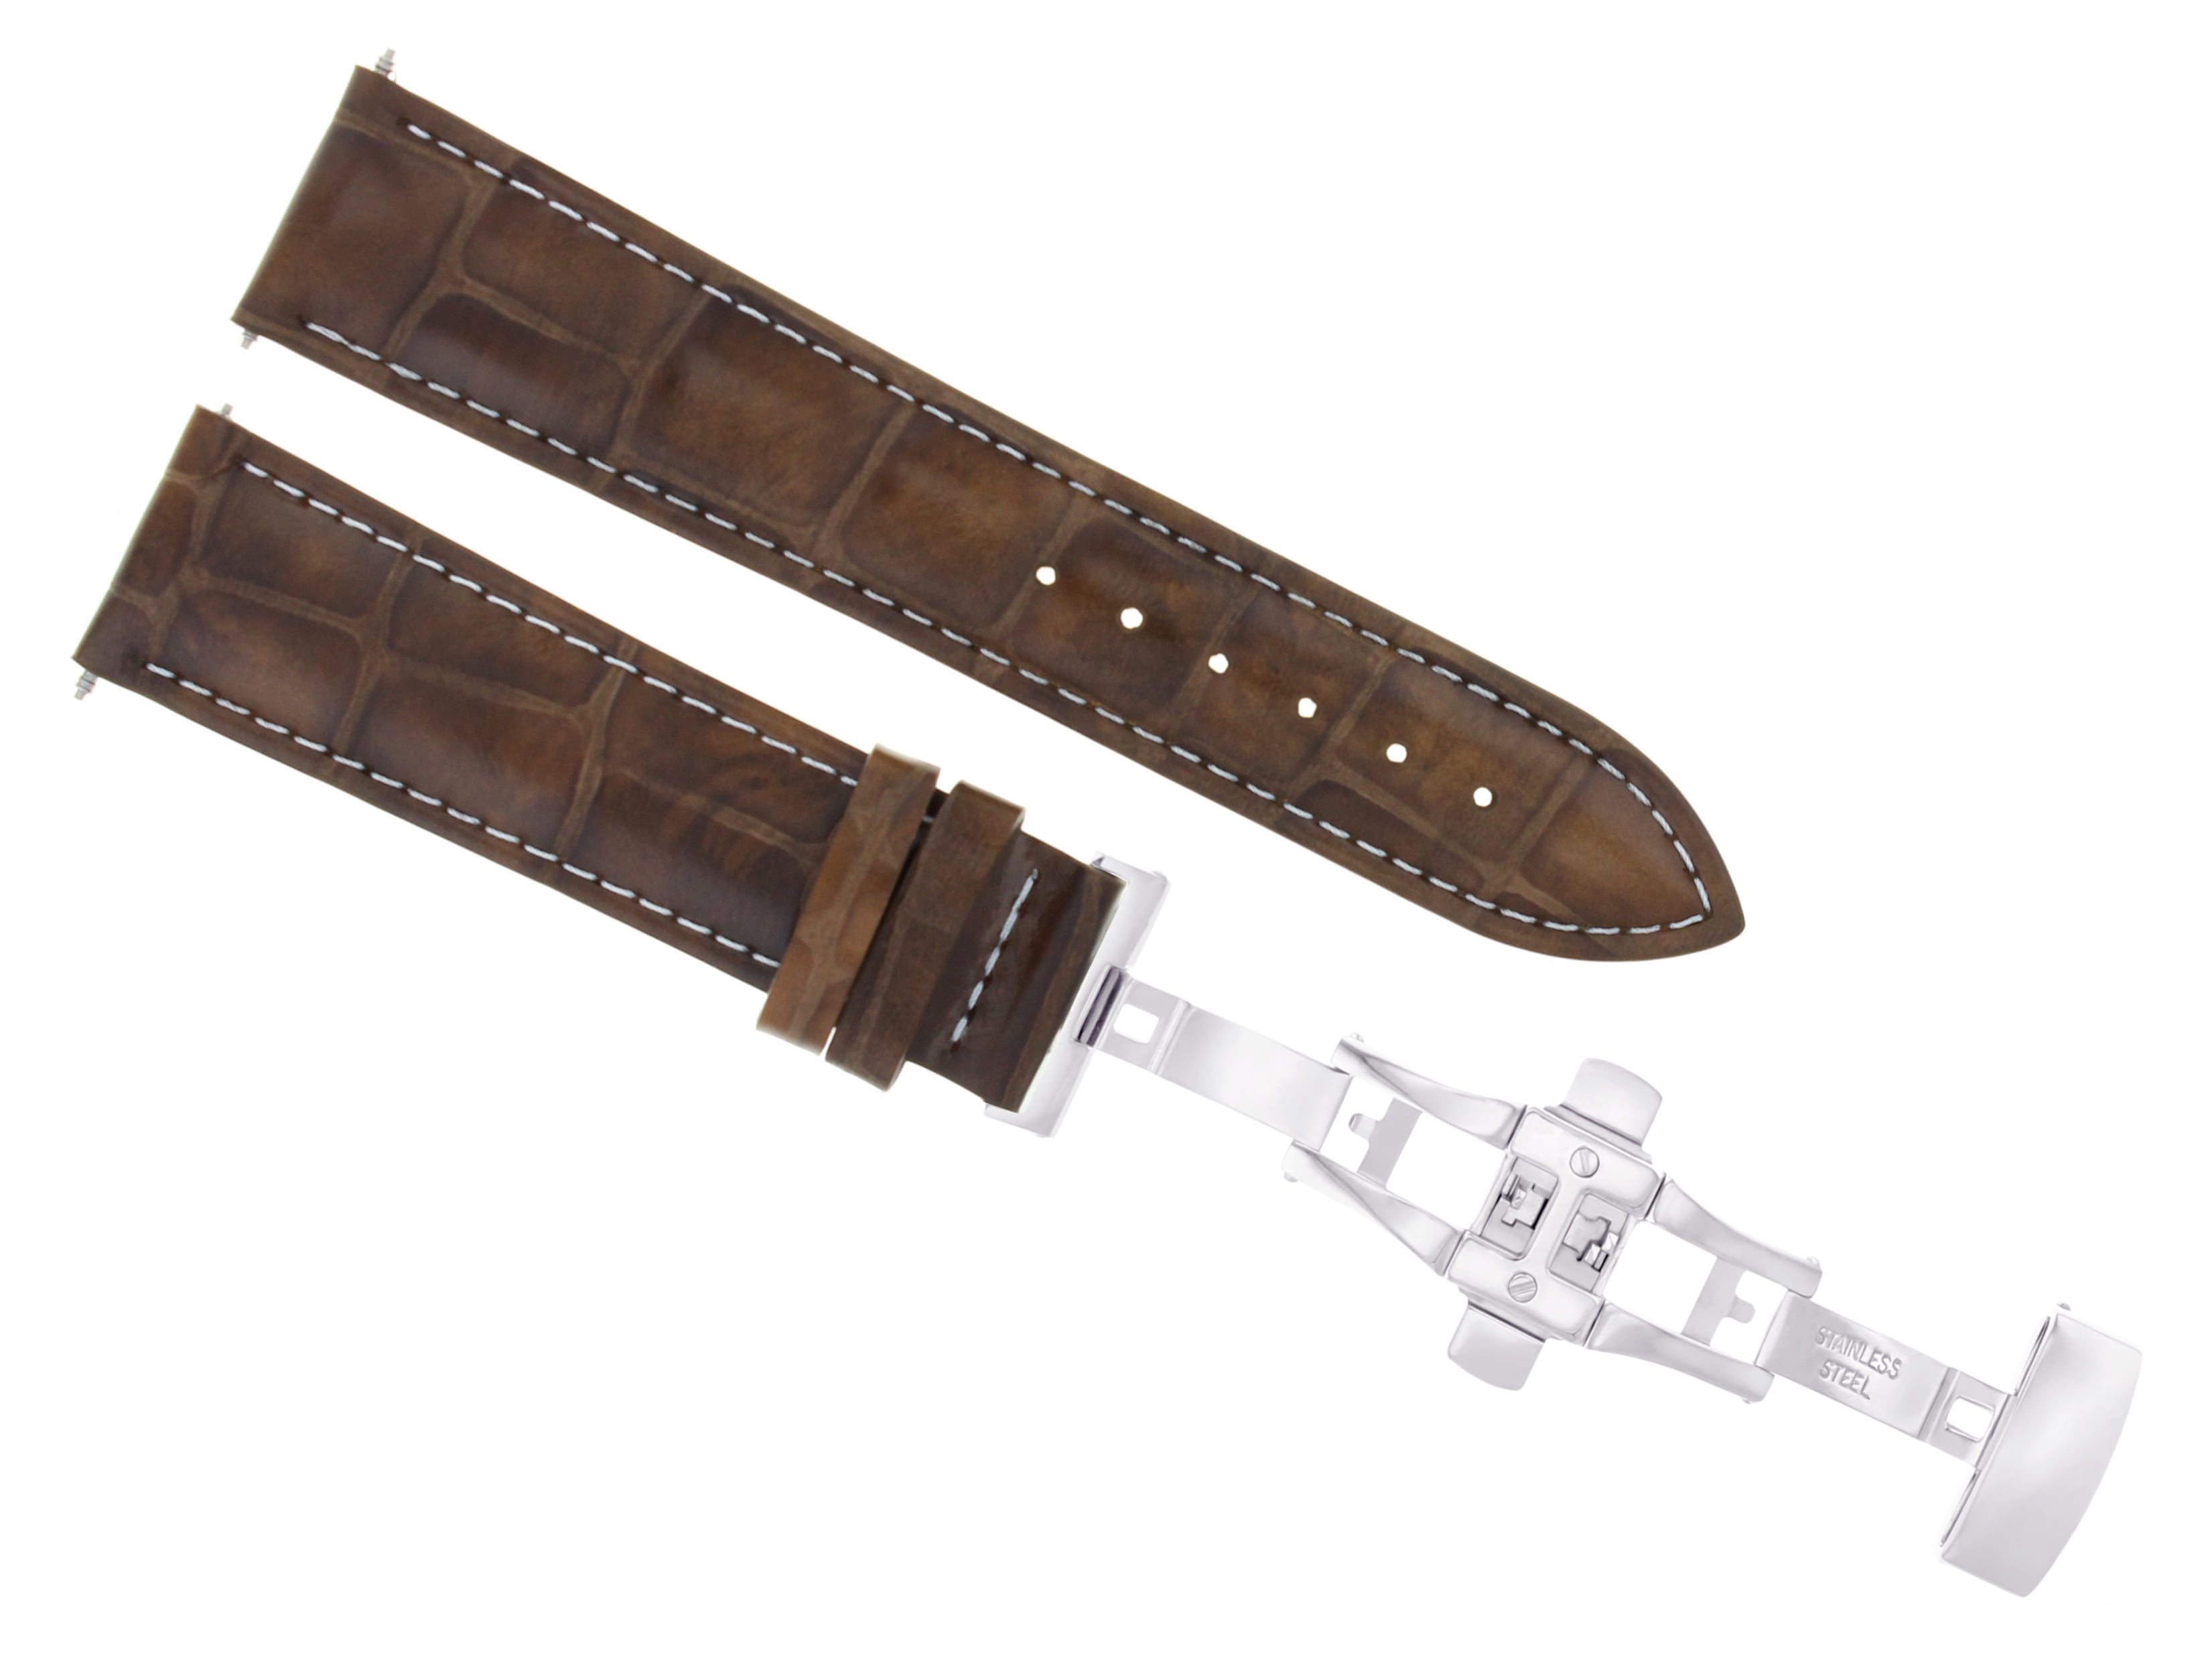 18MM LEATHER STRAP BAND FOR SEIKO 5 SNK809 793 WATCH DEPLOYMENT CLASP  L/BROWN WS 